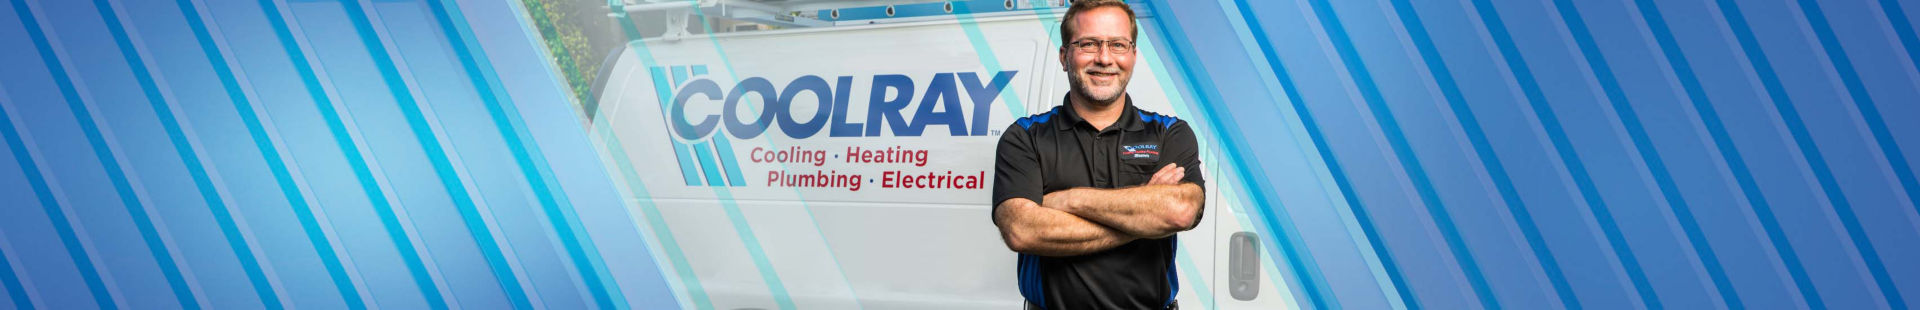 Coolray electrician in front of a service van